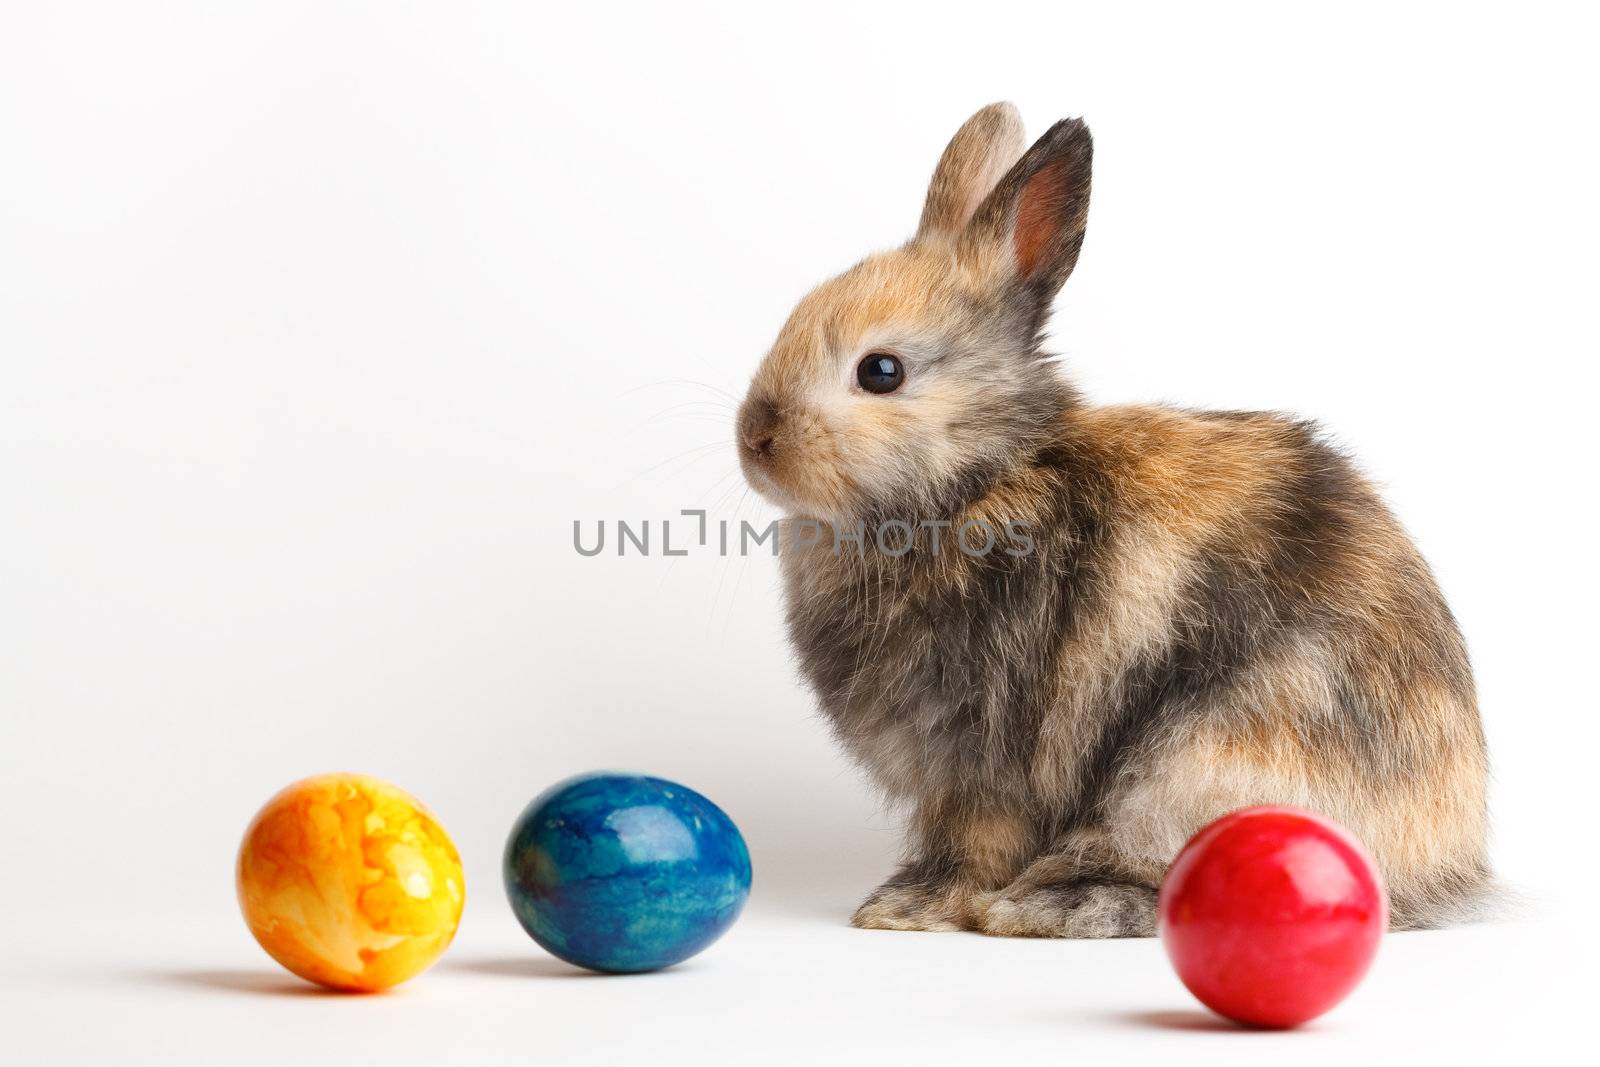 A rabbit with easter eggs isolated on white background